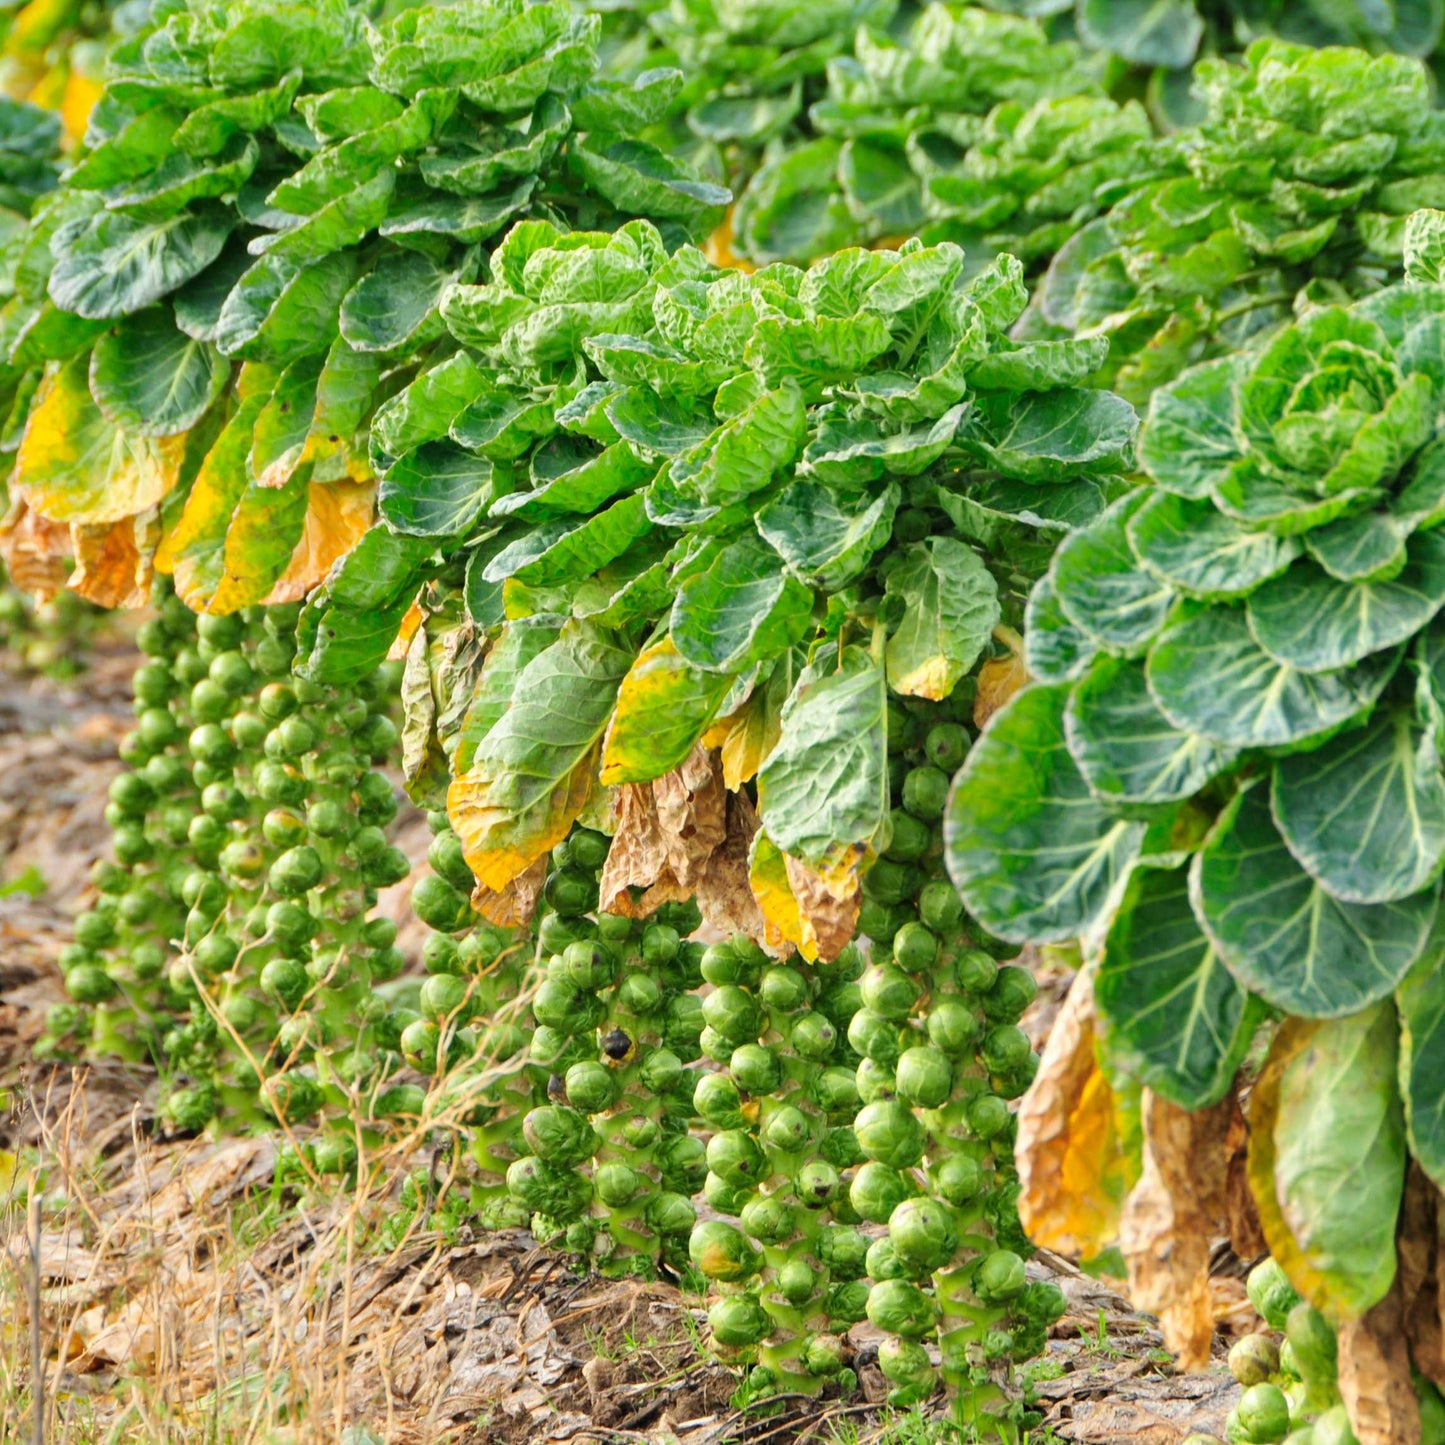 50Pcs Organic Brussels Sprout Seeds